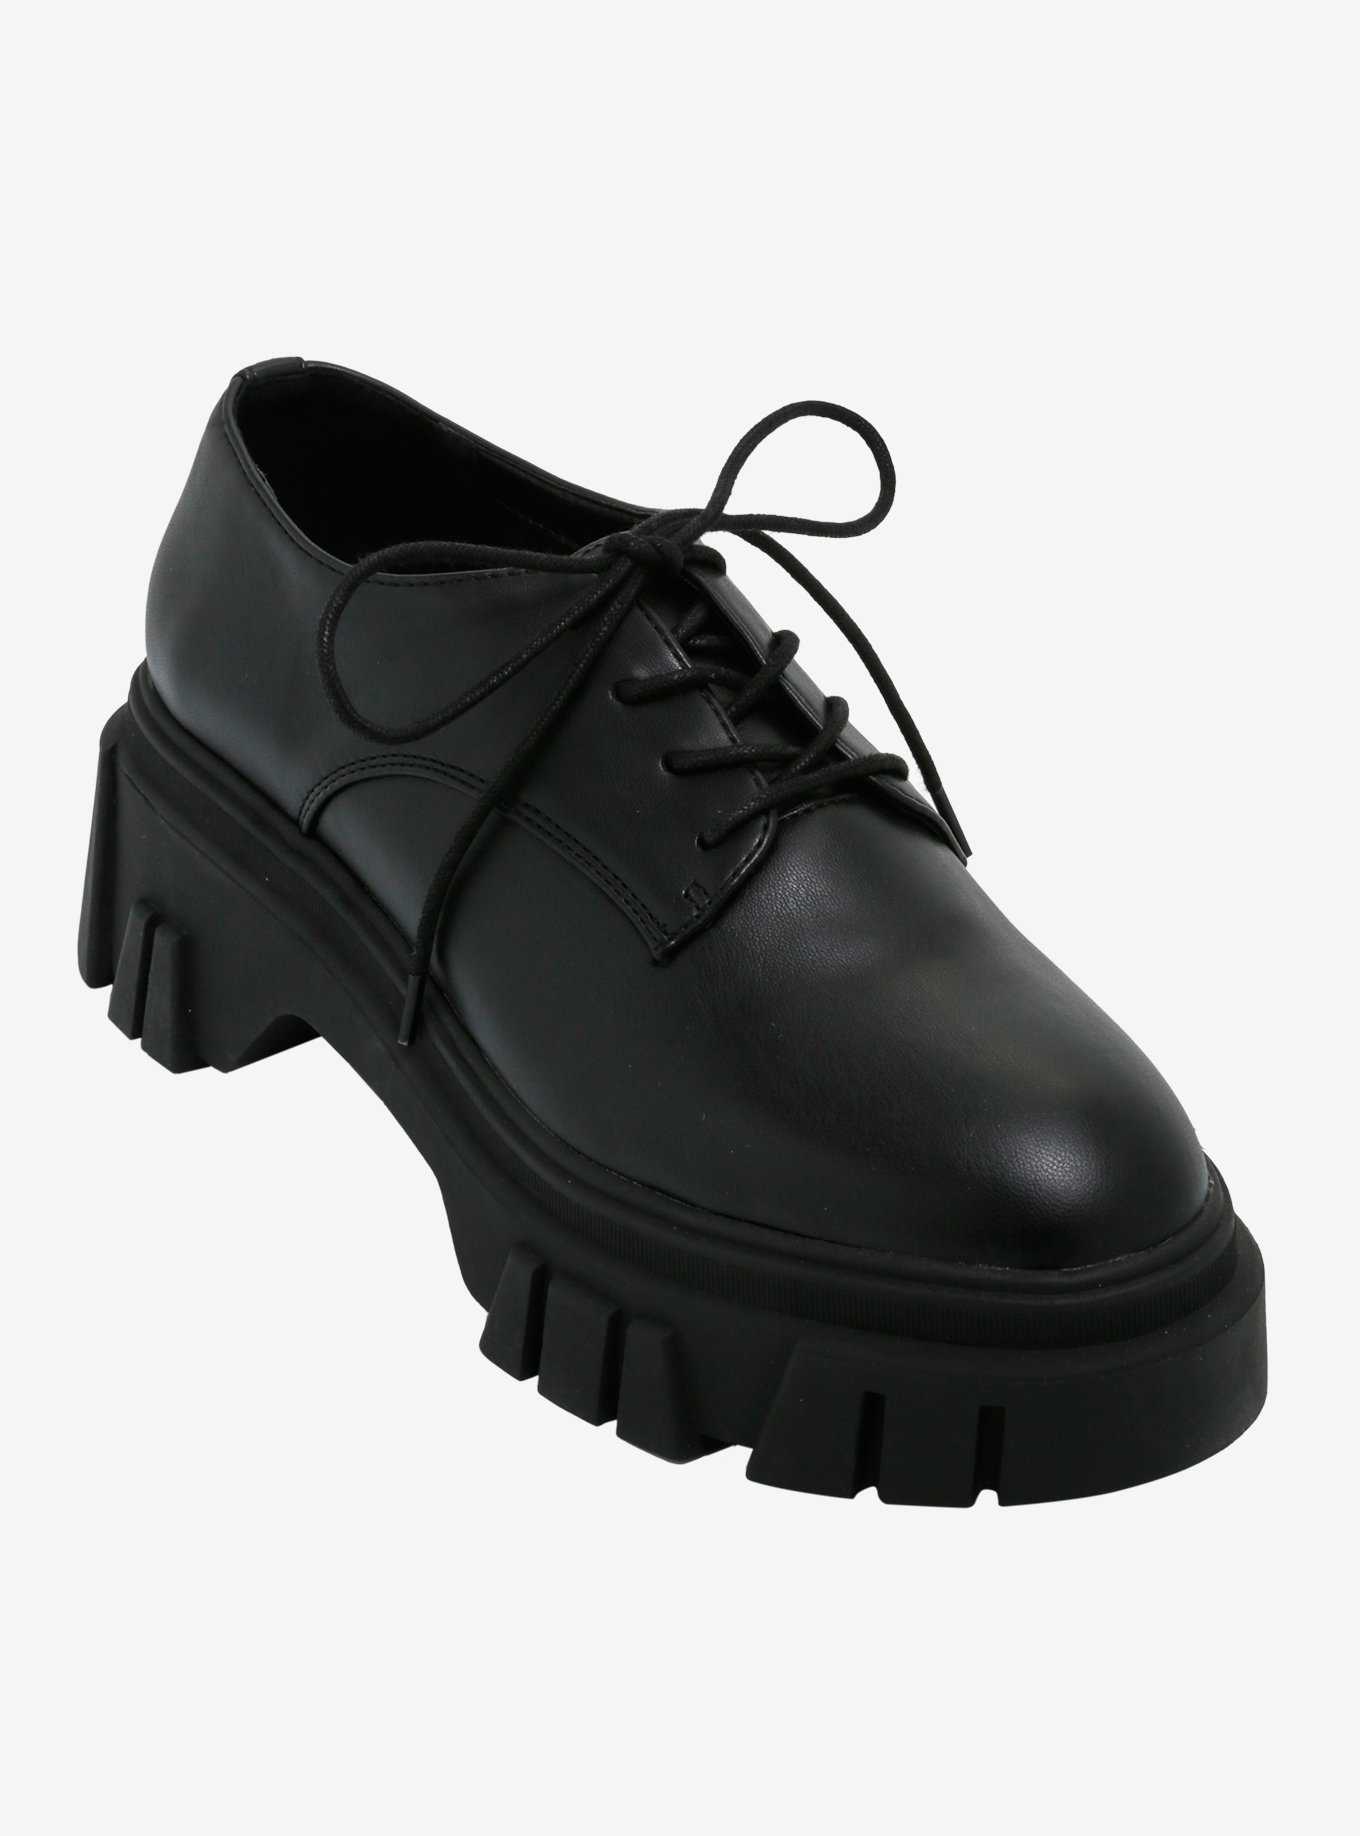 Chinese Laundry Black Chunky Oxford Shoes, , hi-res